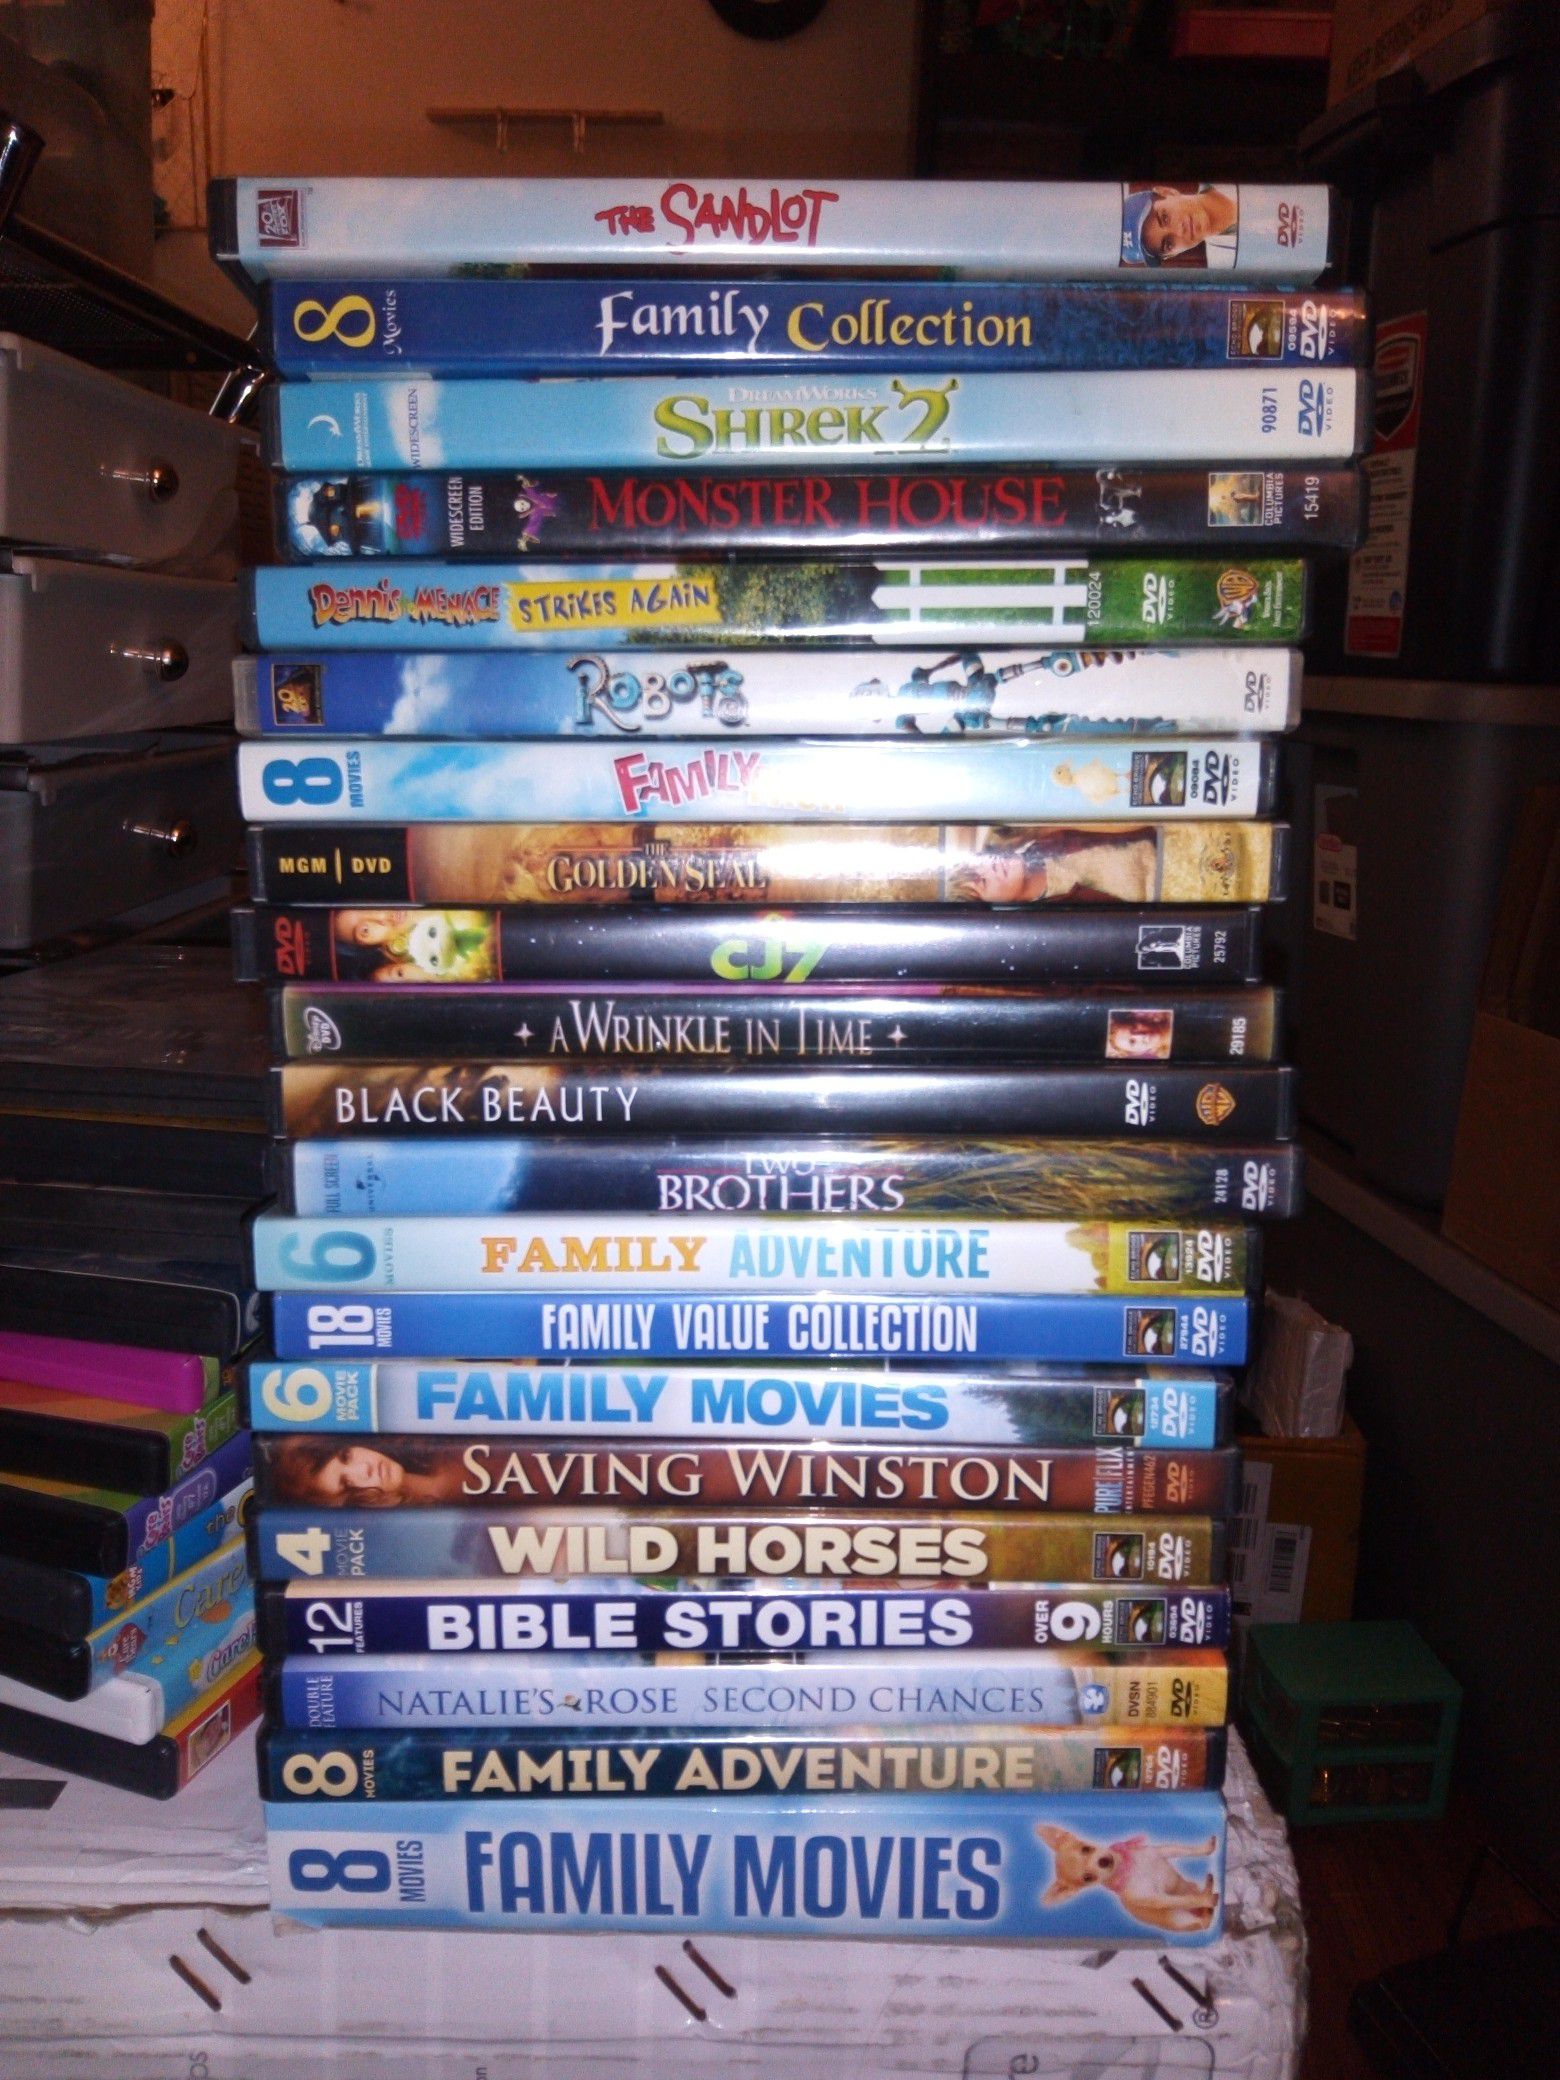 Kids and family DVD lots of movies